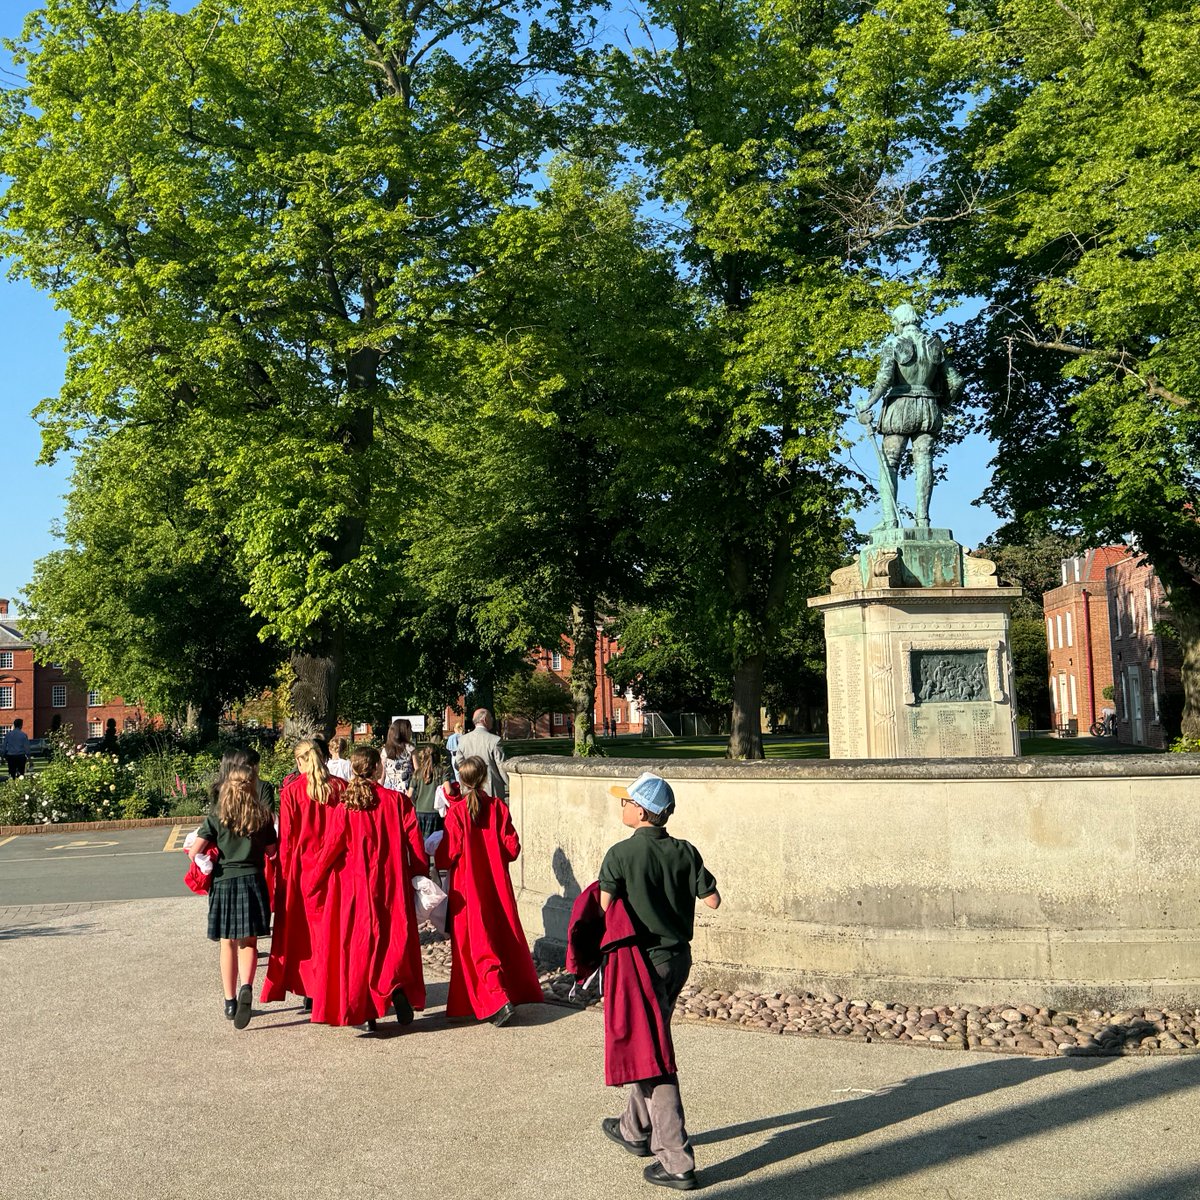 On Sunday, Packwood's choristers enjoyed a wonderful Evensong service with Shrewsbury School. A delightful event, held in the chapel at Shrewsbury. Thanks to those who joined us. #PackwoodMusic